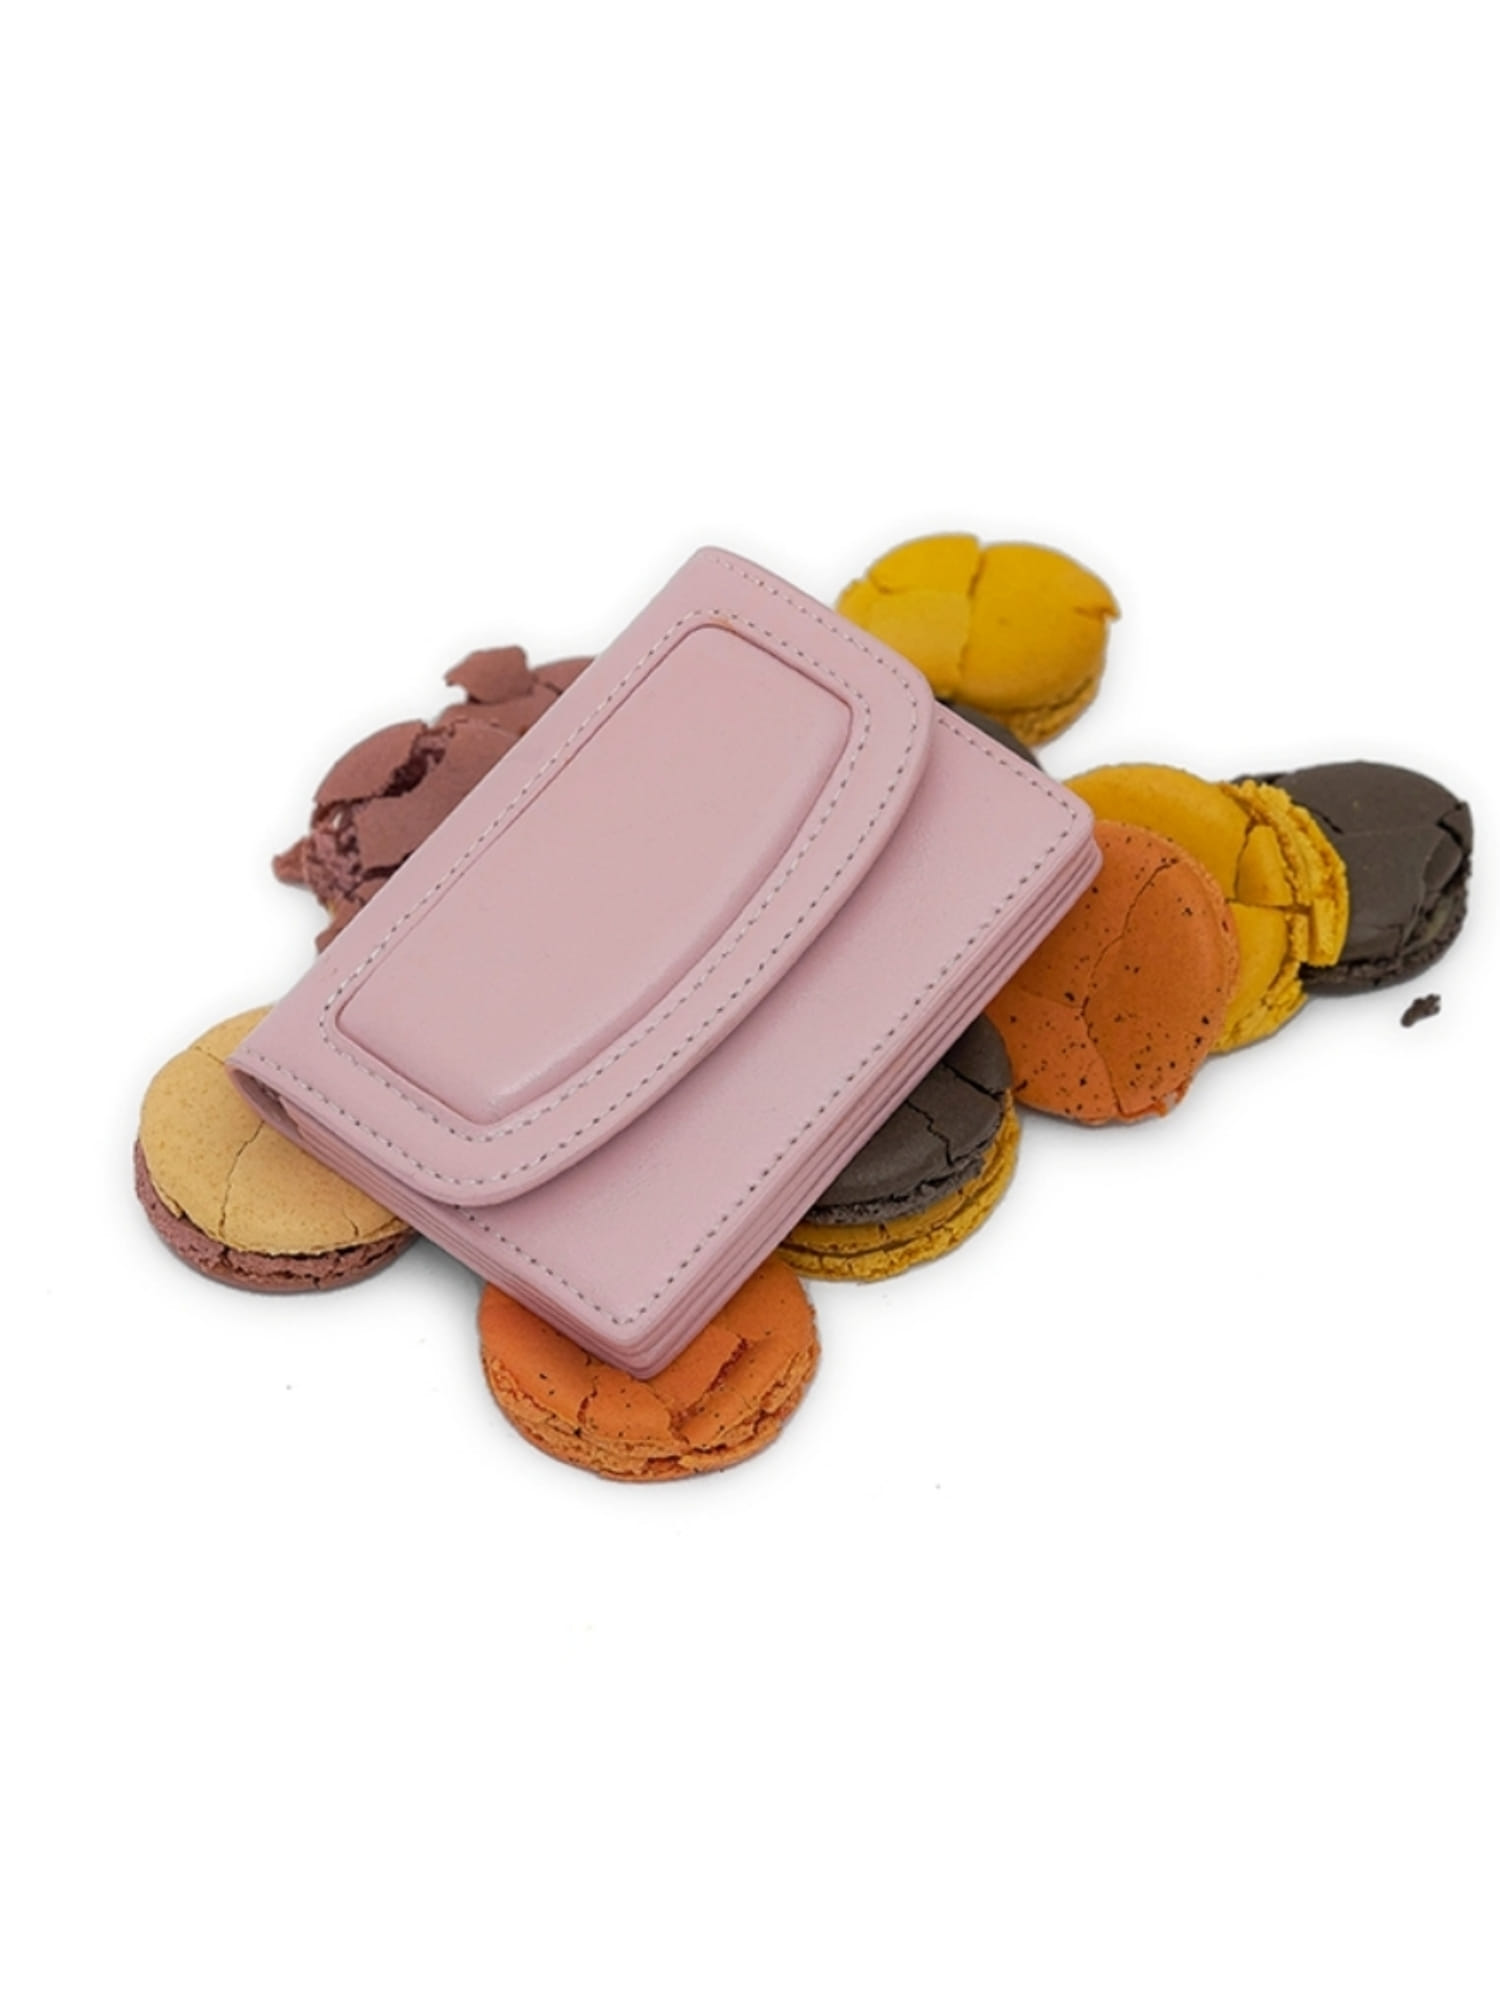 PALETTE Leather Card Case Wallet - Baby Pink